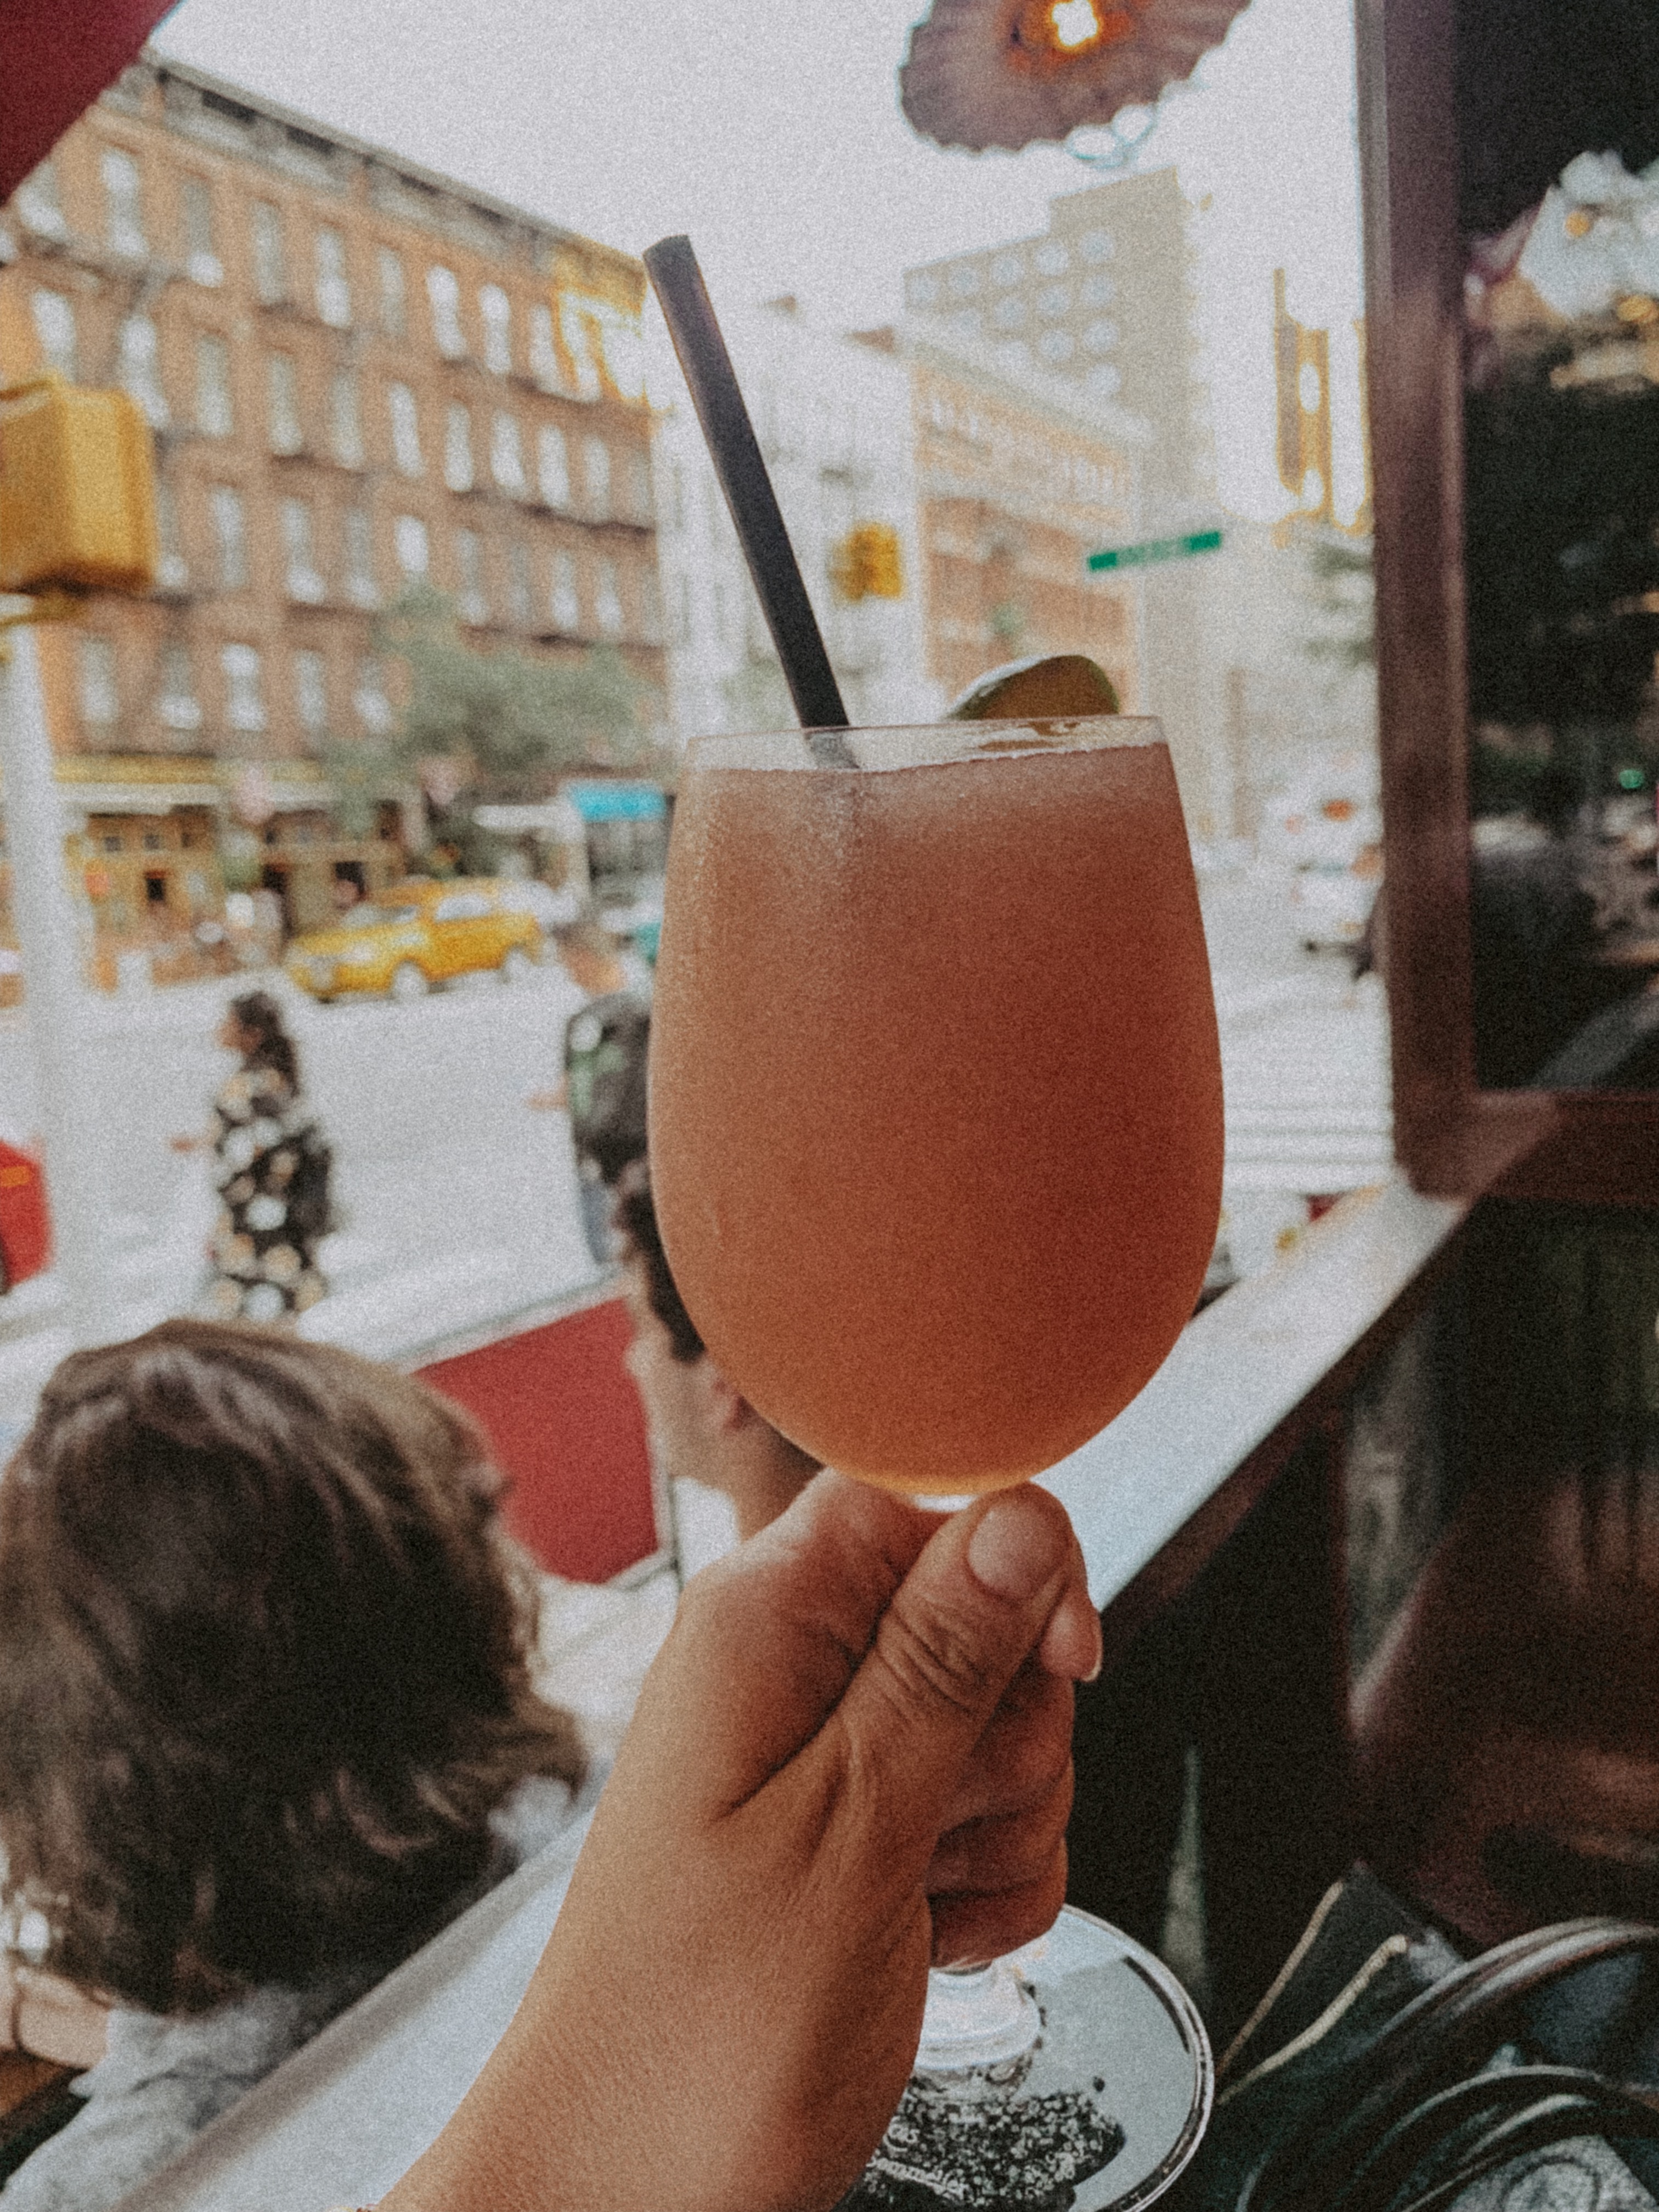 Where To Get The Best Frozen Rosé In NYC – Brazen Fox NYC - Drinks - Frozé – Bar - New York City #nyc #newyorkcity #frosé #rosé #cheers #summer #travel #vacation